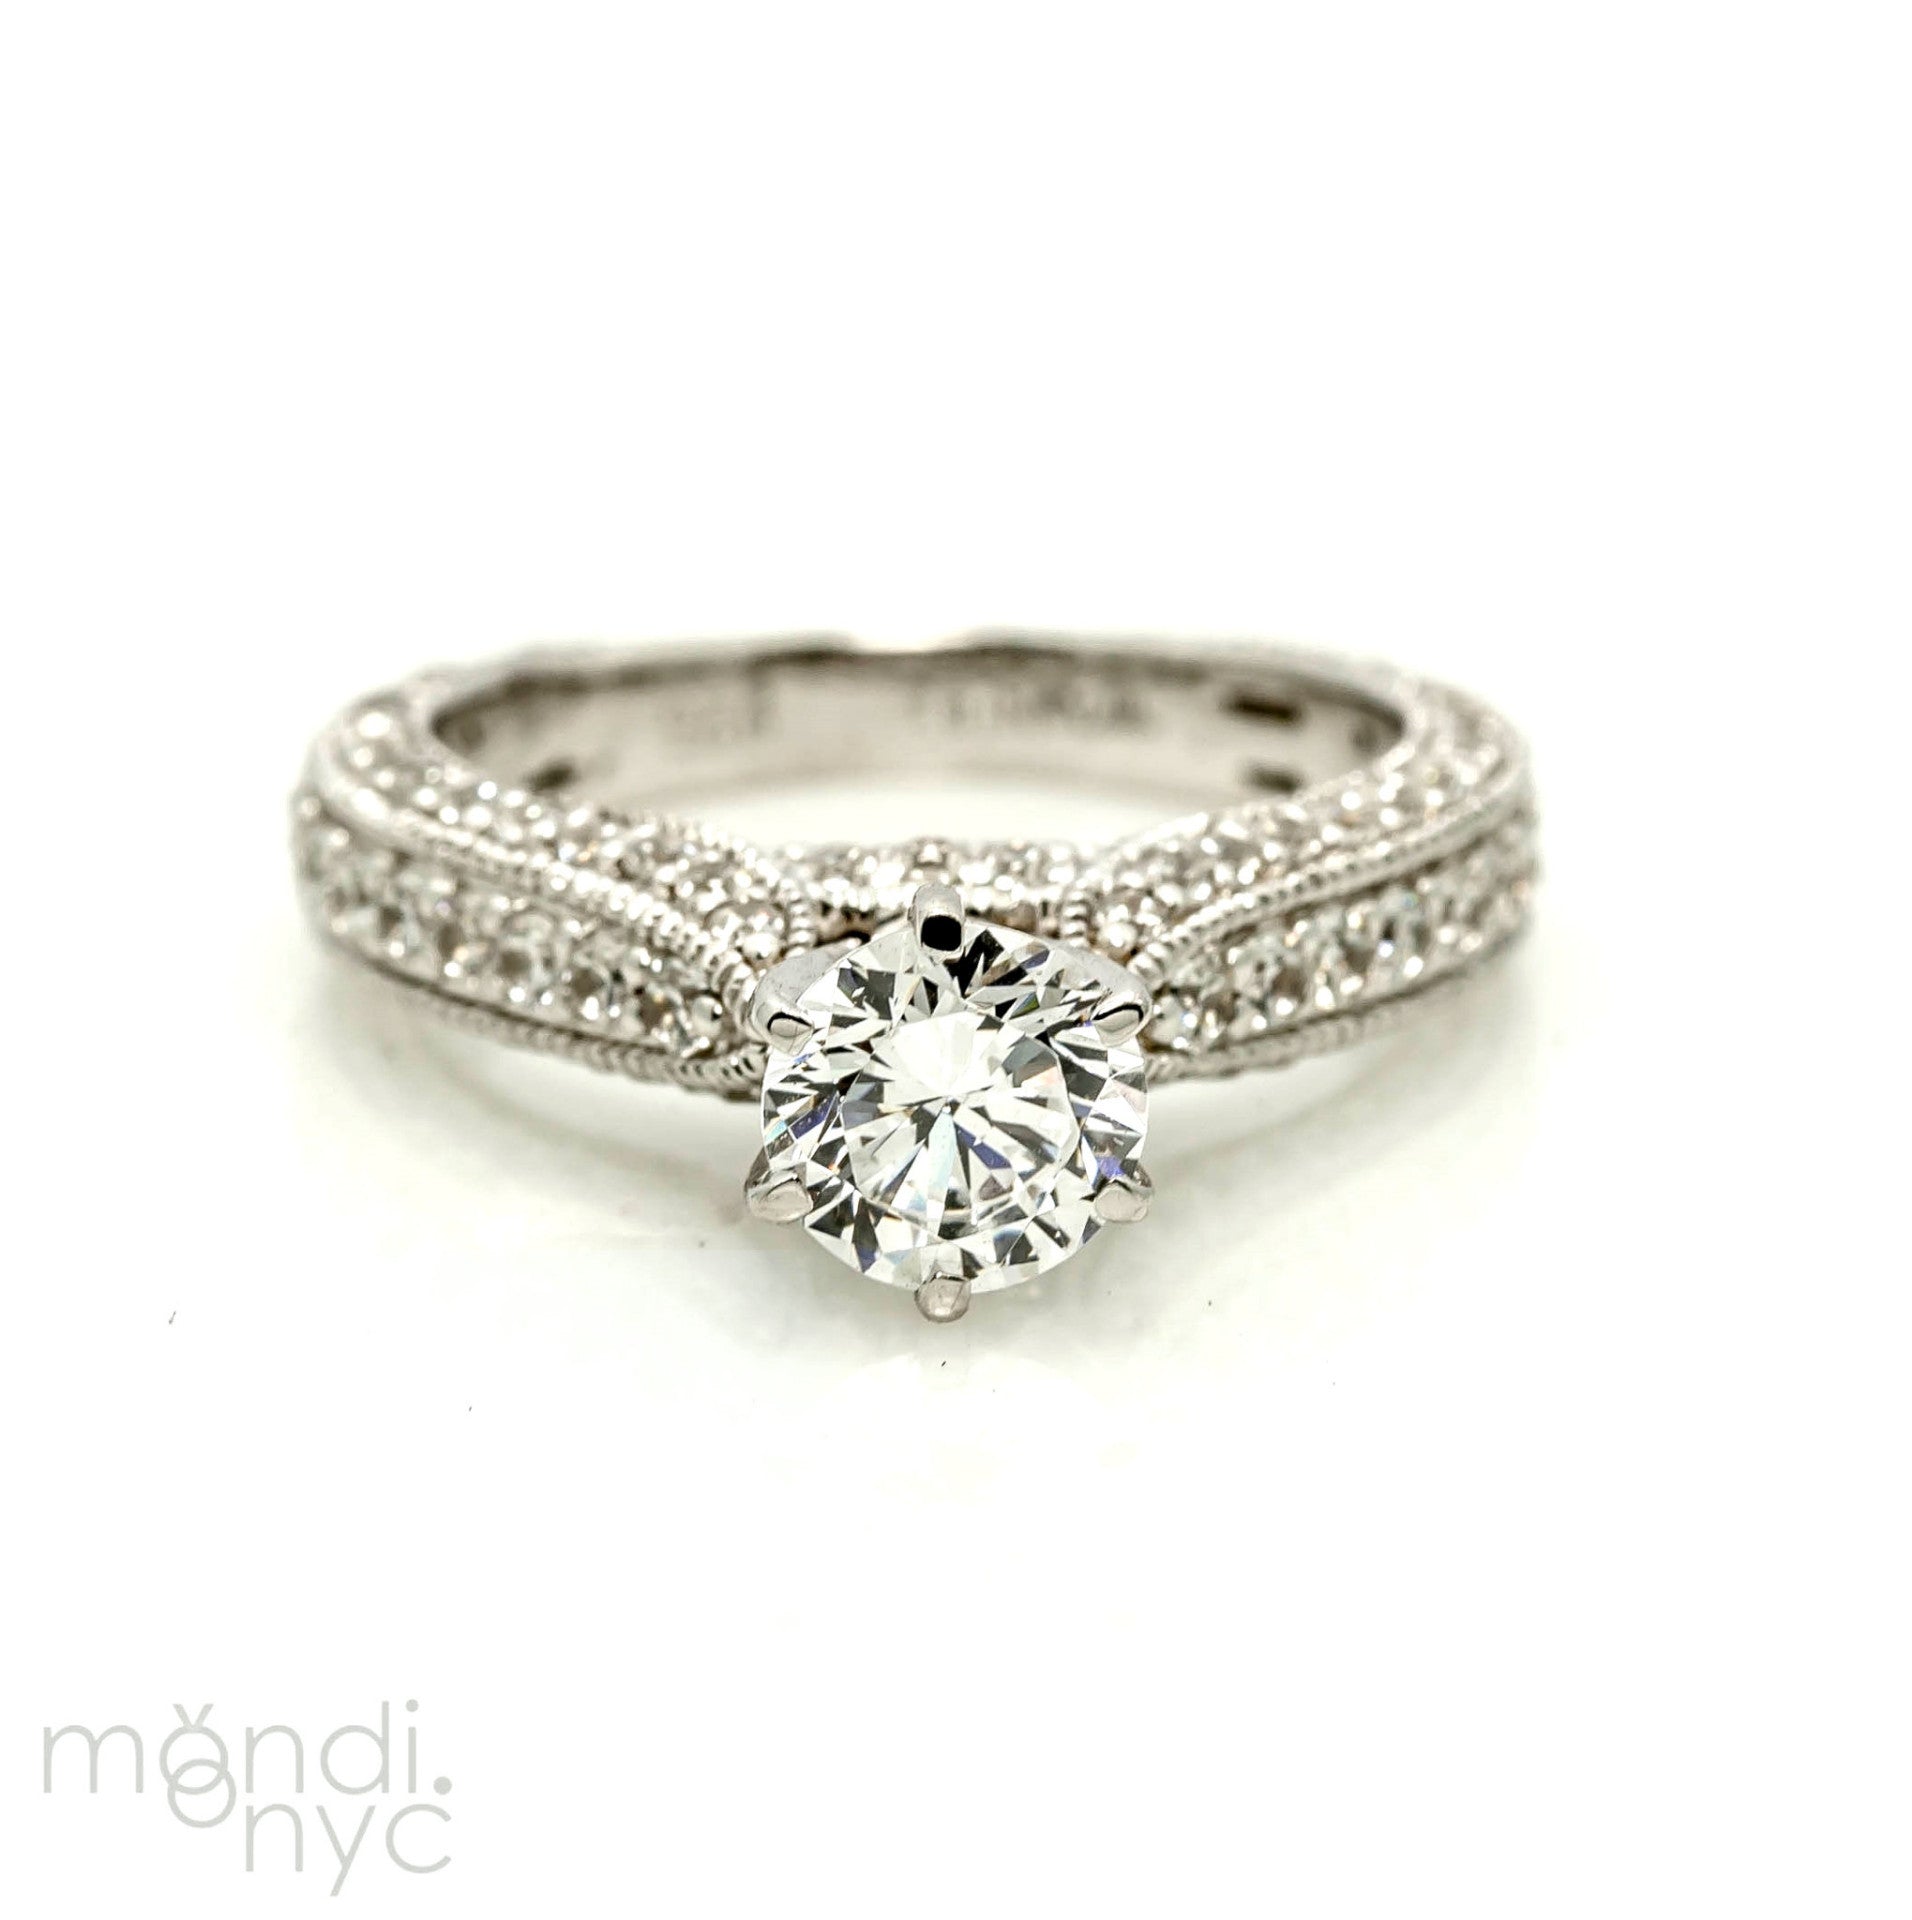 Art Deco Style Moissanite Engagement Ring, Unique 1 Carat Forever Brilliant Moissanite Ring, With 1.07 Carat Of Diamonds, Anniversary Ring - FBY11302